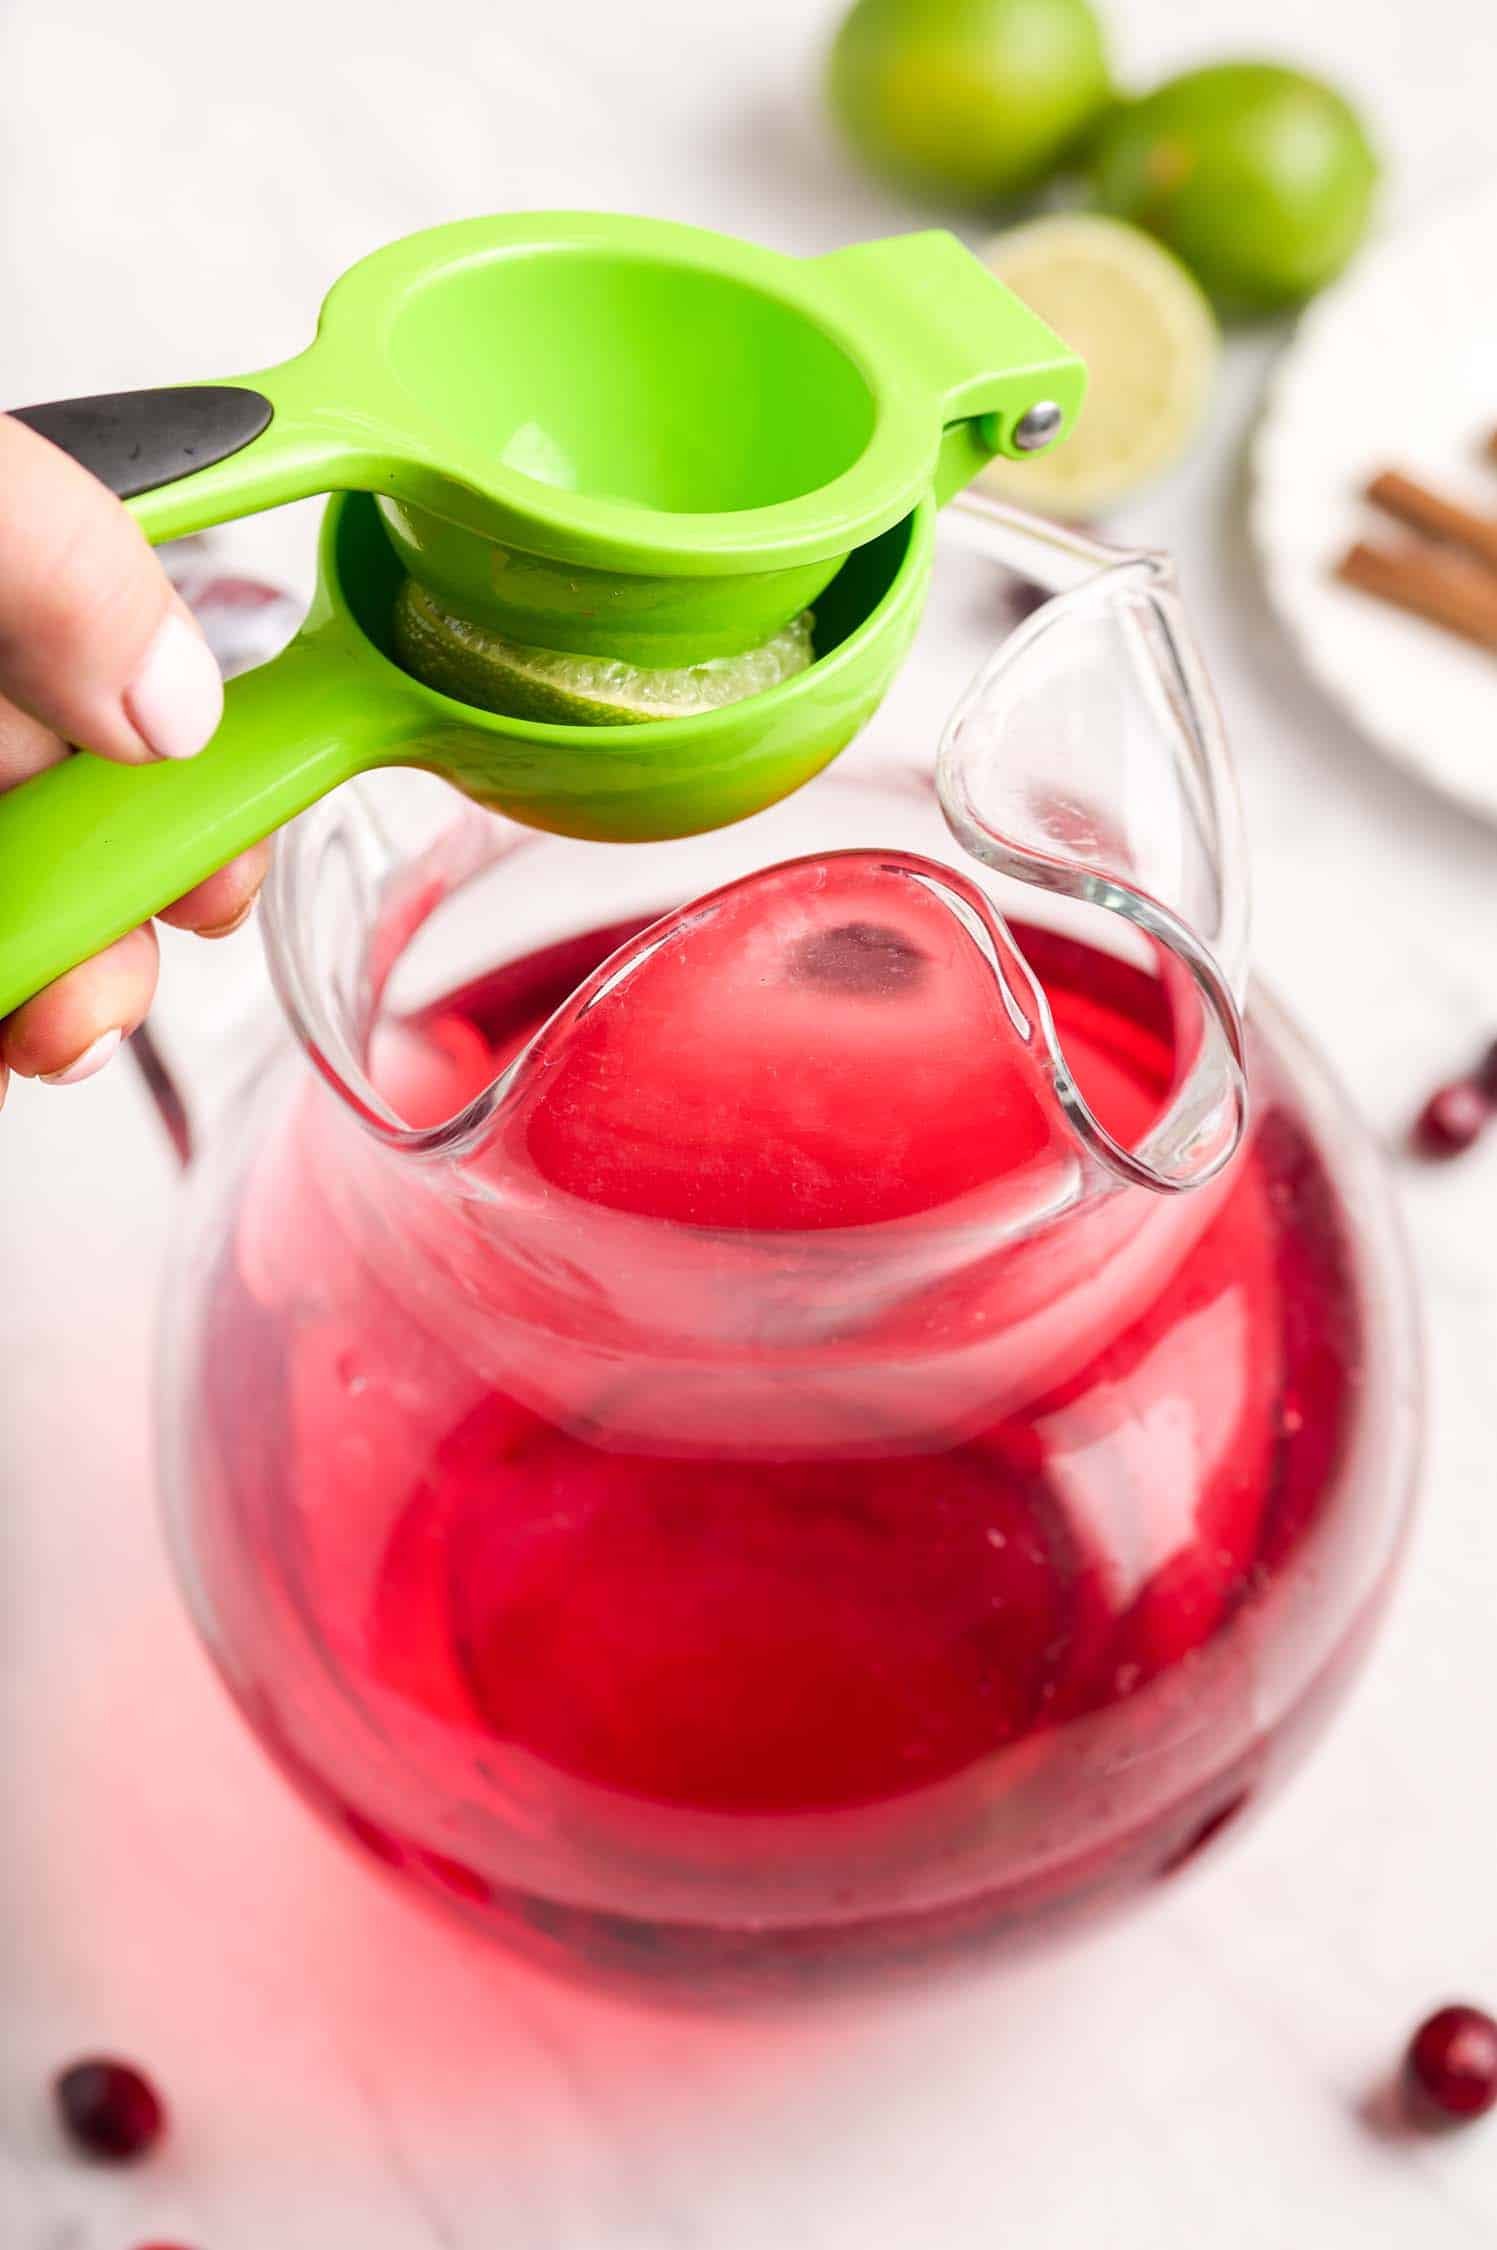 Squeezing limes into a pitcher of cranberry wine